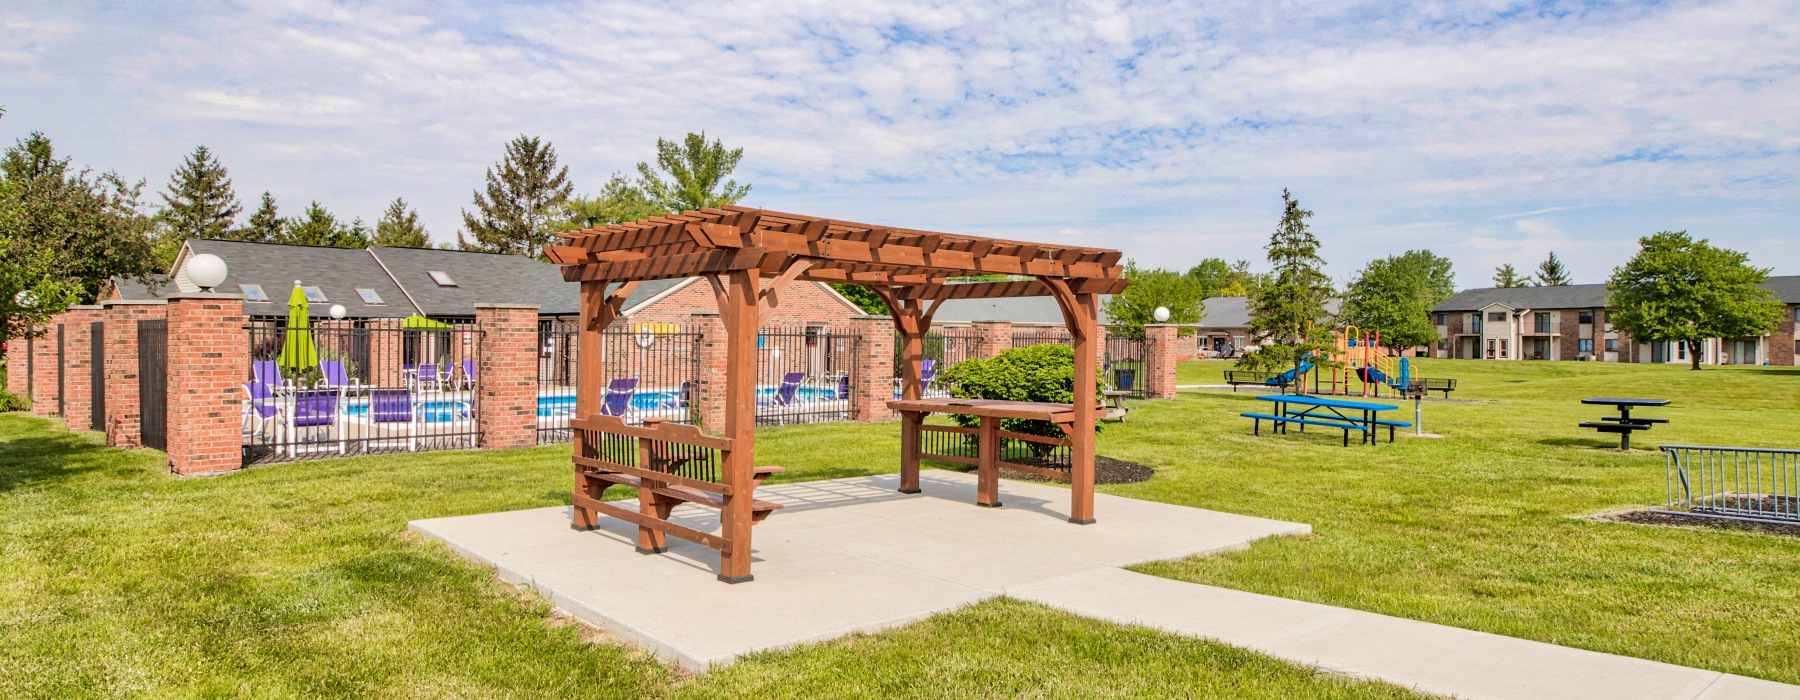 Outdoor pergola with seating near a playground